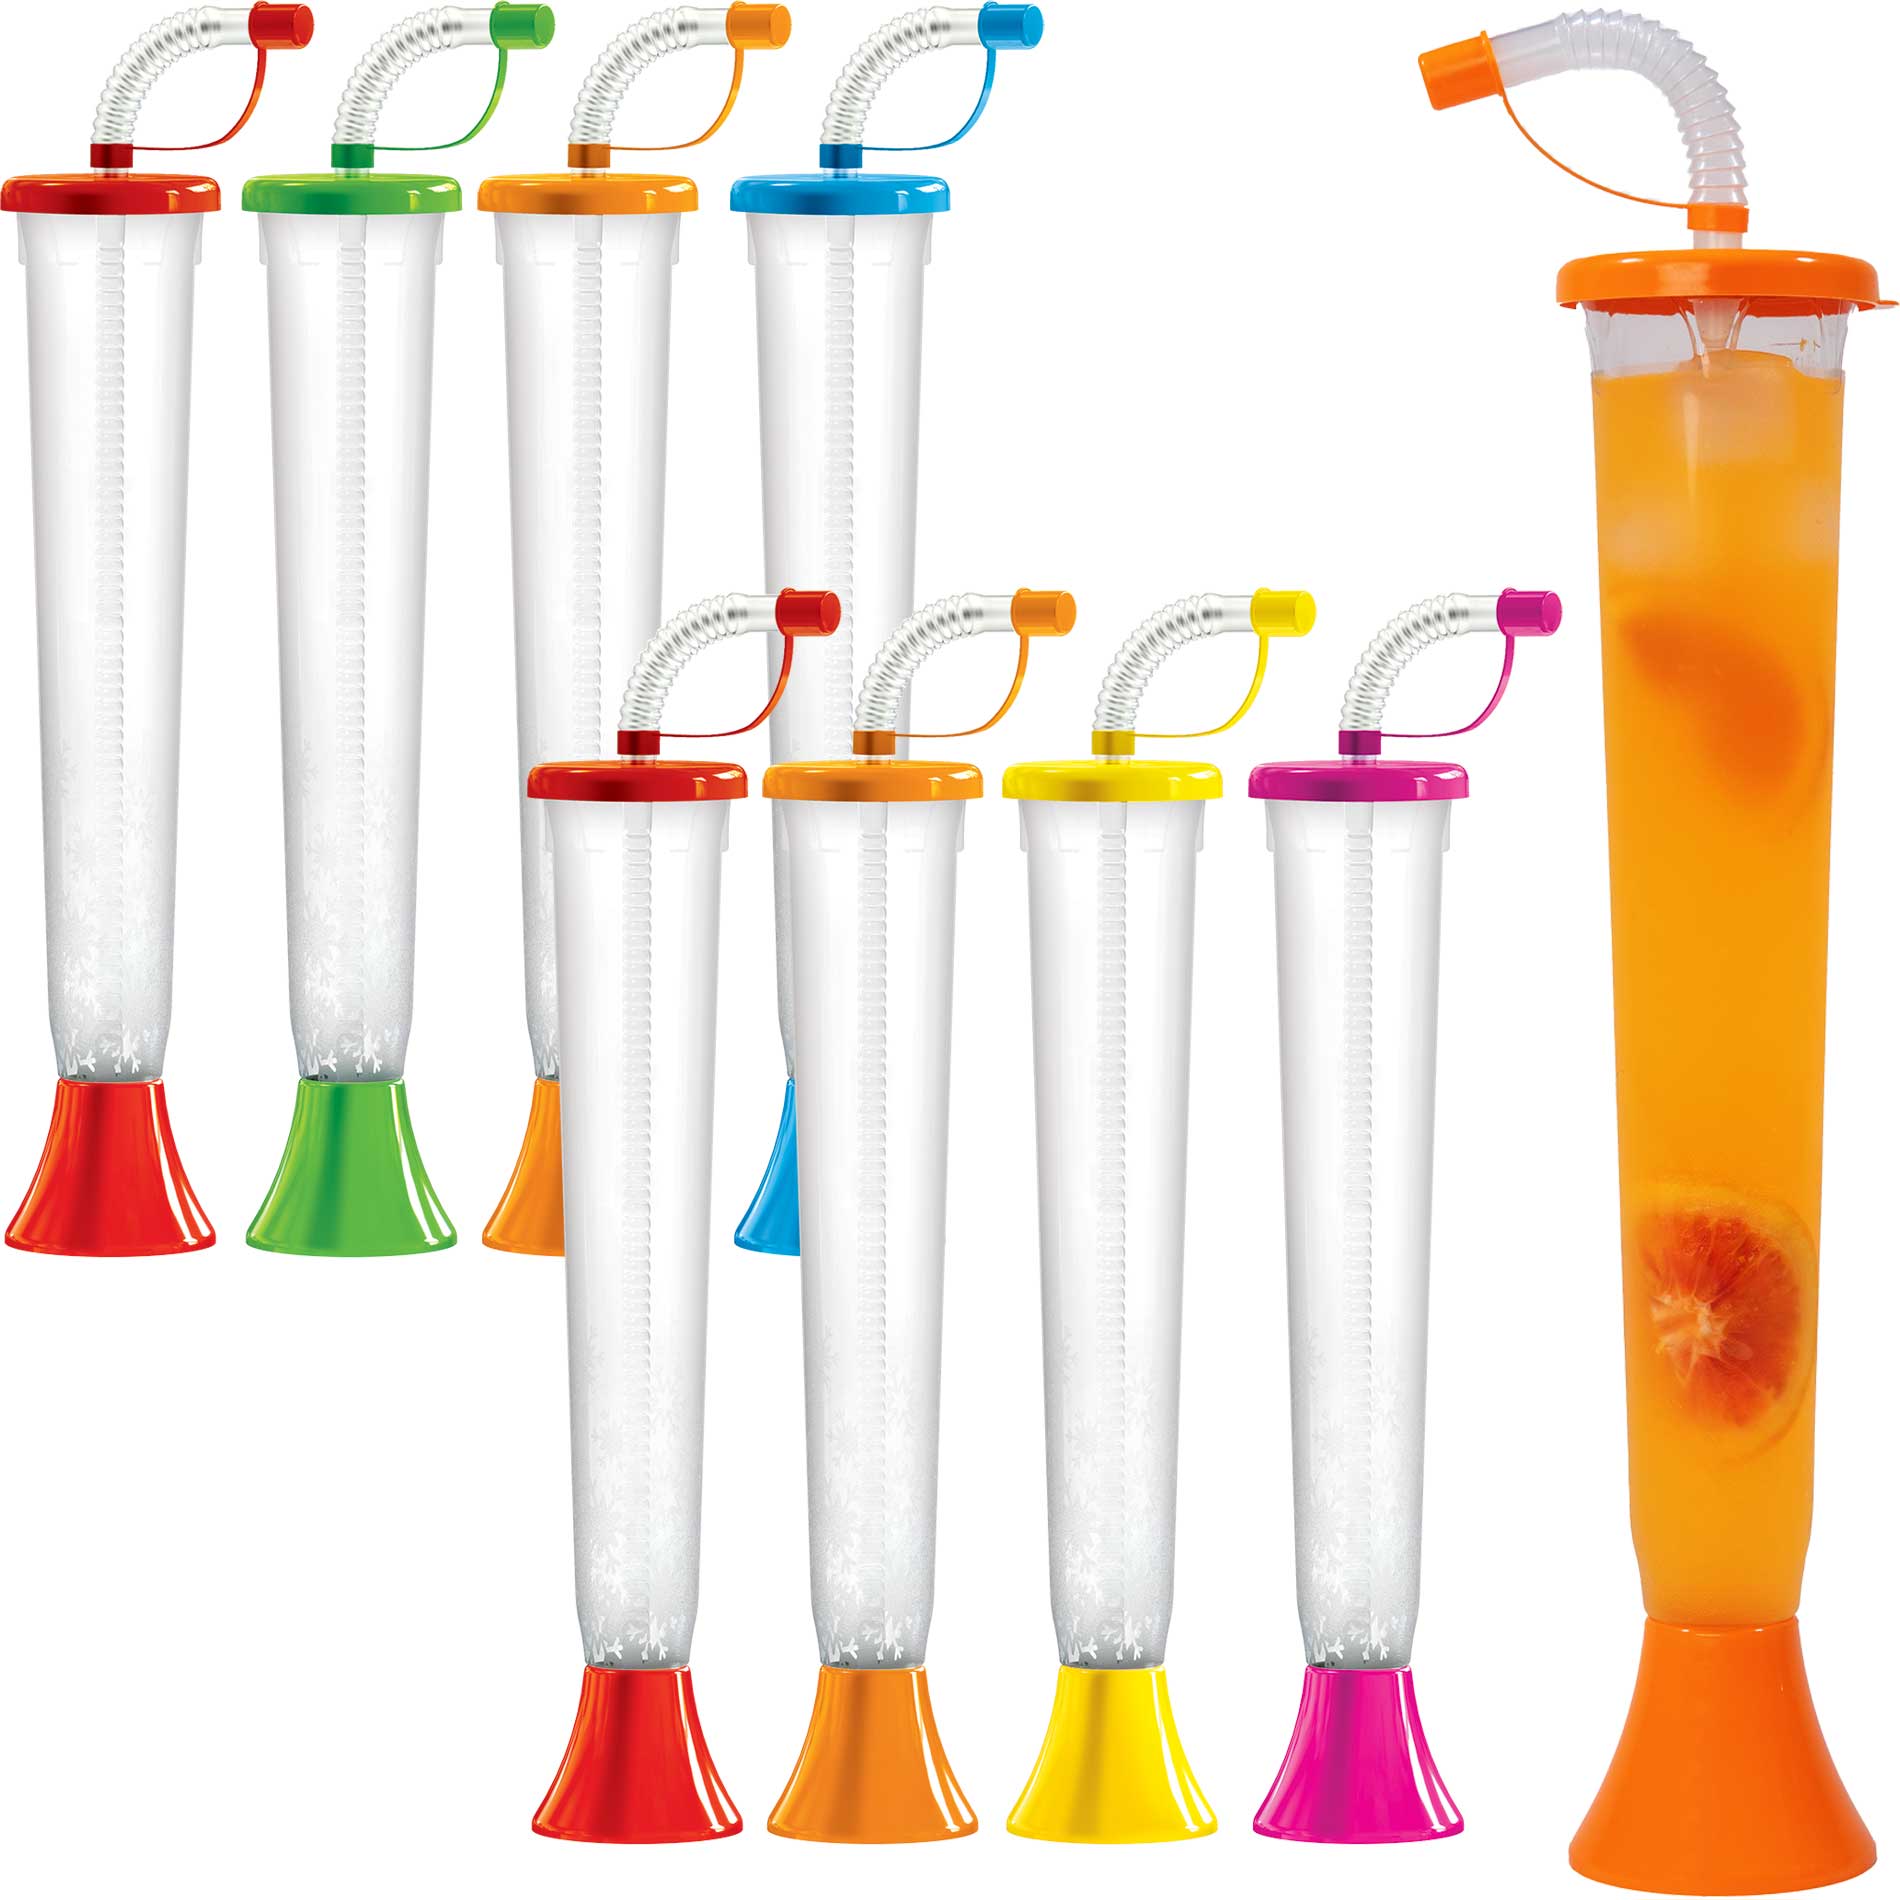 http://noveltycupsusa.com/cdn/shop/files/sweet-world-usa-yard-cups-108-cups-yard-cups-variety-pack-14oz-for-margaritas-and-frozen-drinks-sw-40000f-v-cups-with-lids-and-straws-35523466199199.jpg?v=1684776397